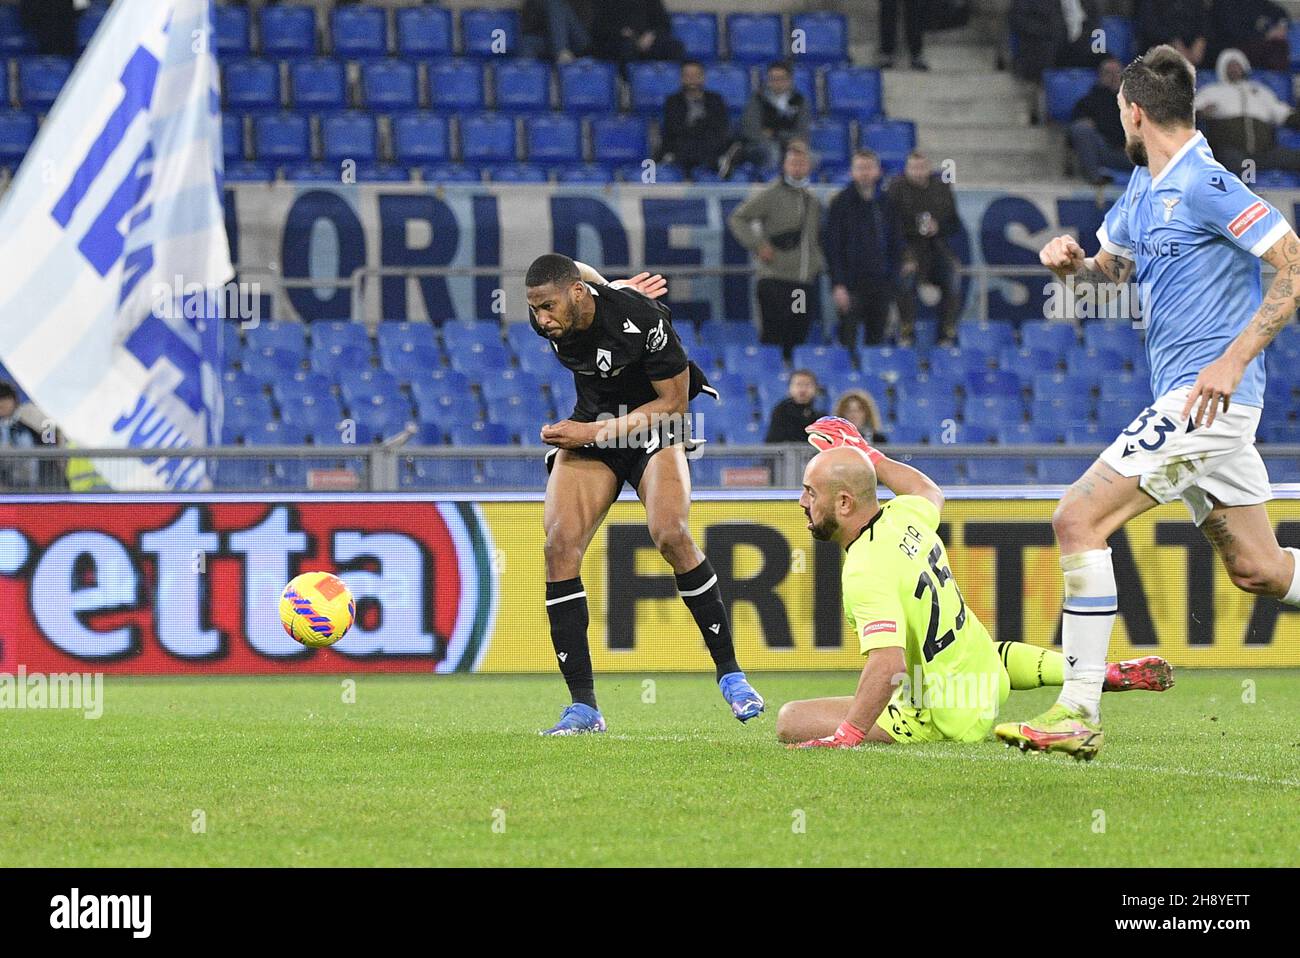 Rome, Italy. 2 December 2021, Norberto Bercique Gomes Betuncal (Udinese) gol 0-2 during the  Italian Football Championship League A 2021/2022 match between SS Lazio vs Udinese Calcio at the Olimpic Stadium in Rome on 02 December 2021. Stock Photo